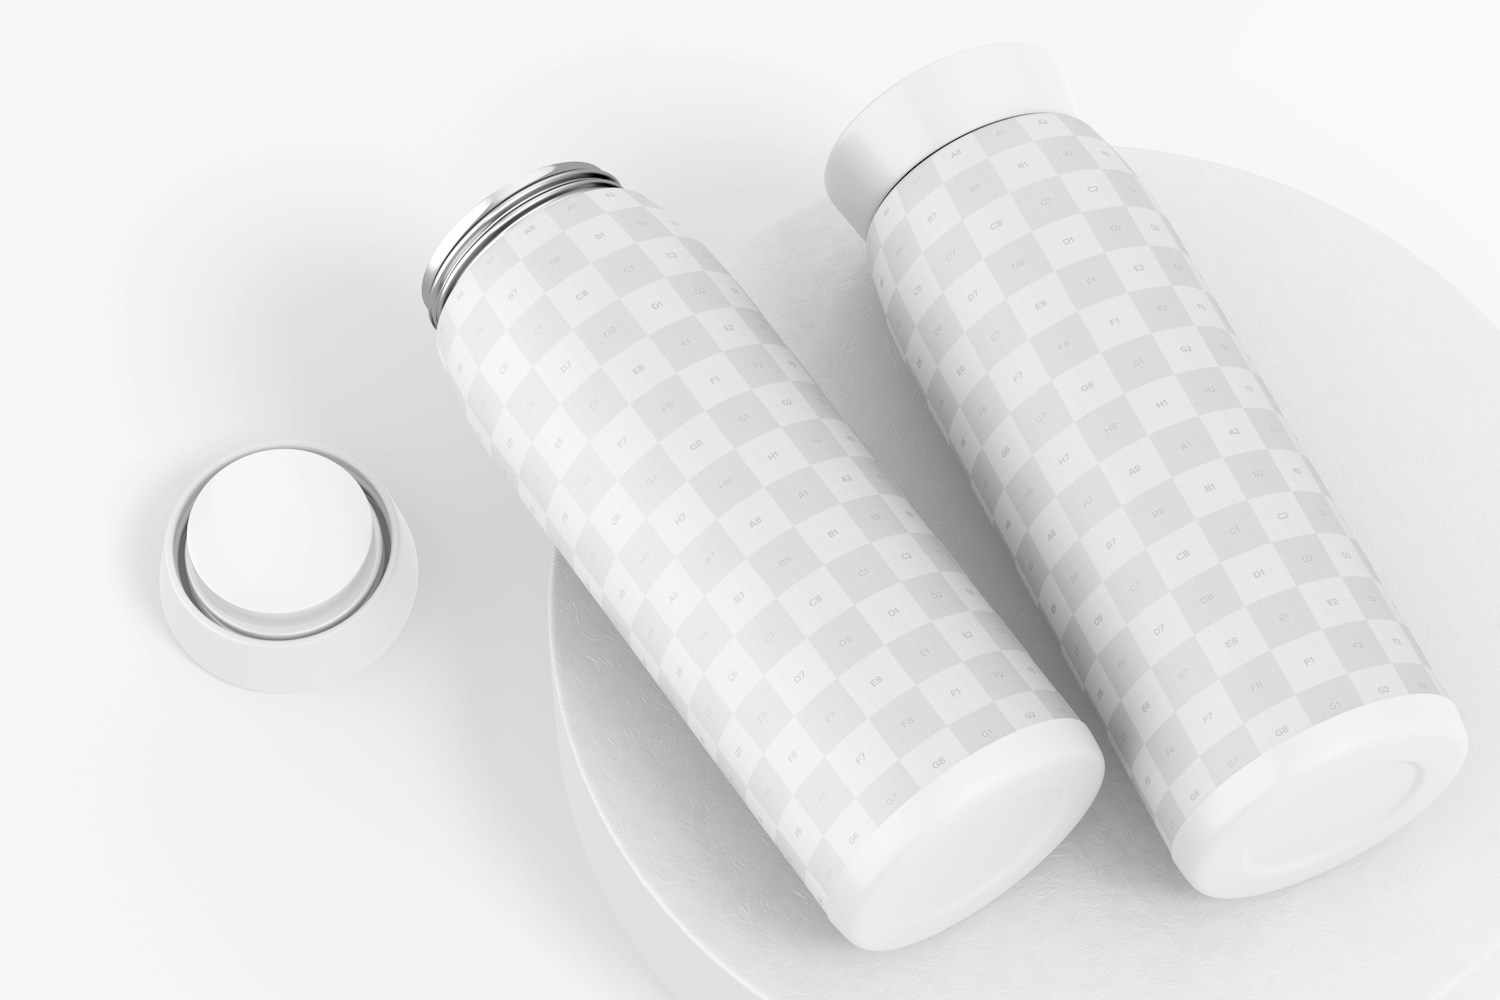 Metallic Thermos Mockup, Opened and Closed